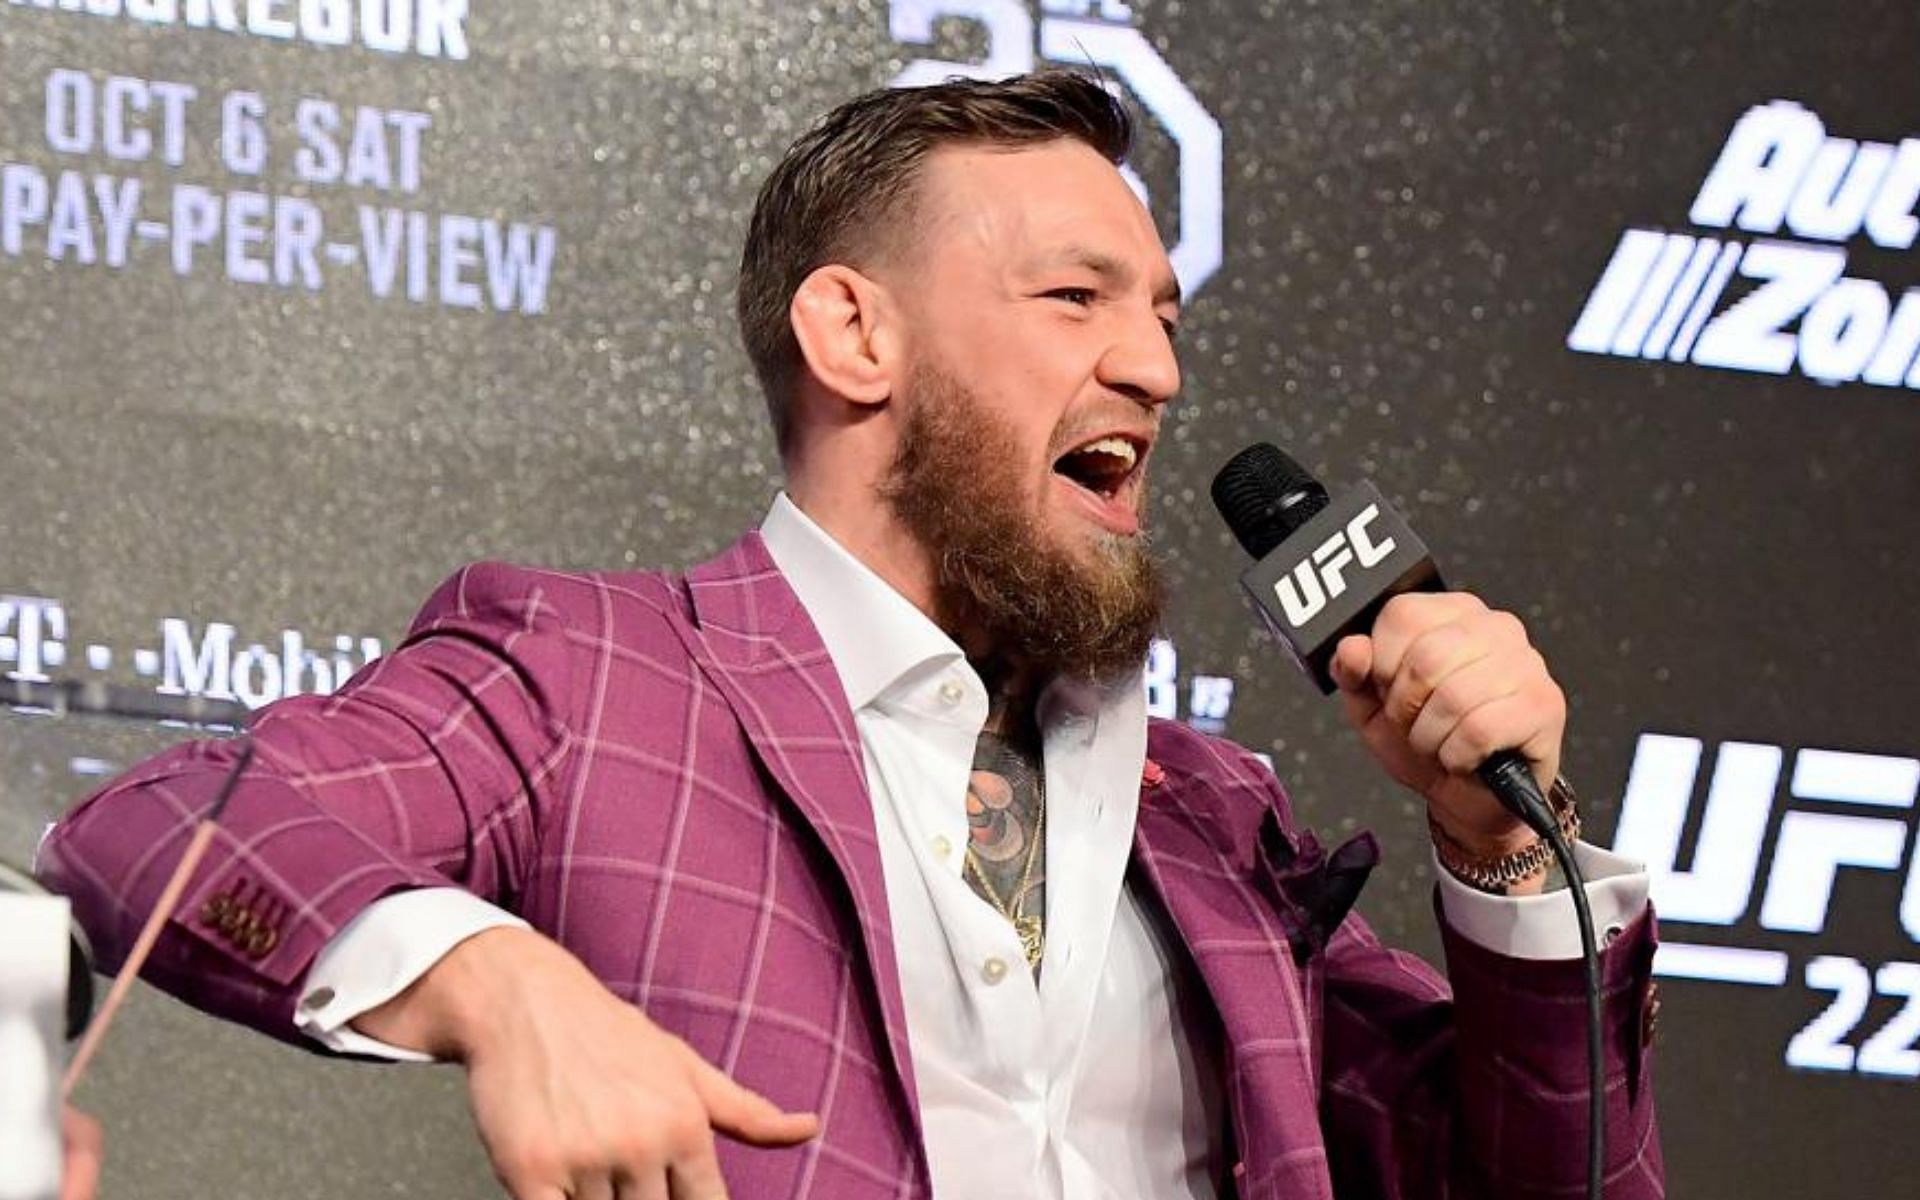 Conor McGregor has fallen out with numerous individuals he was once close to over the years